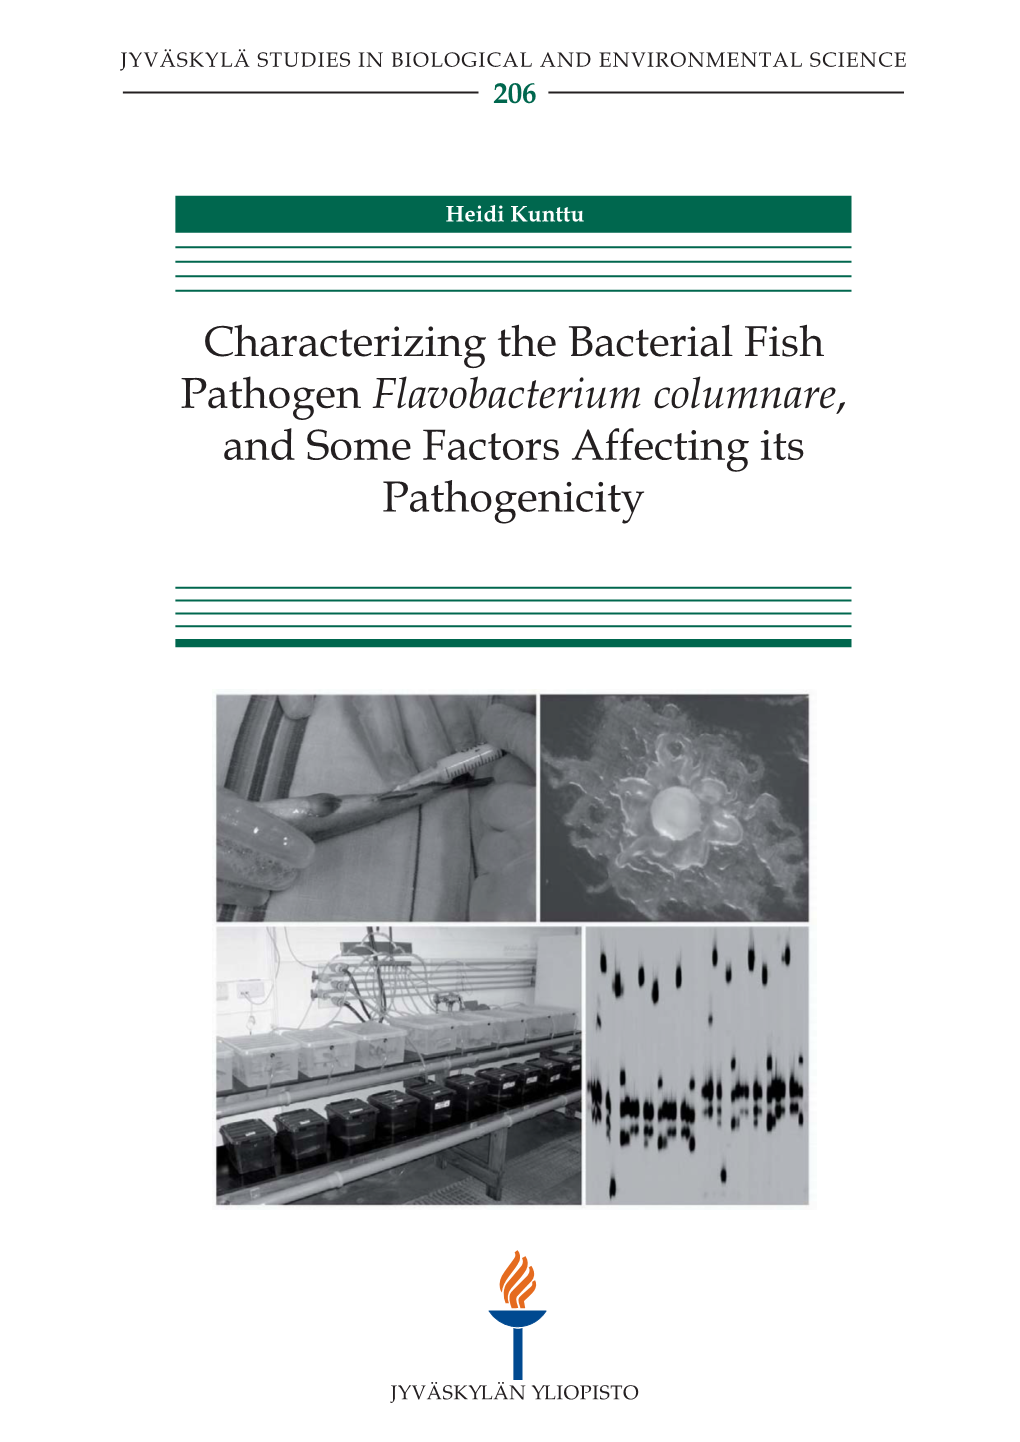 Characterizing the Bacterial Fish Pathogen Flavobacterium Columnare, and Some Factors Affecting Its Pathogenicity